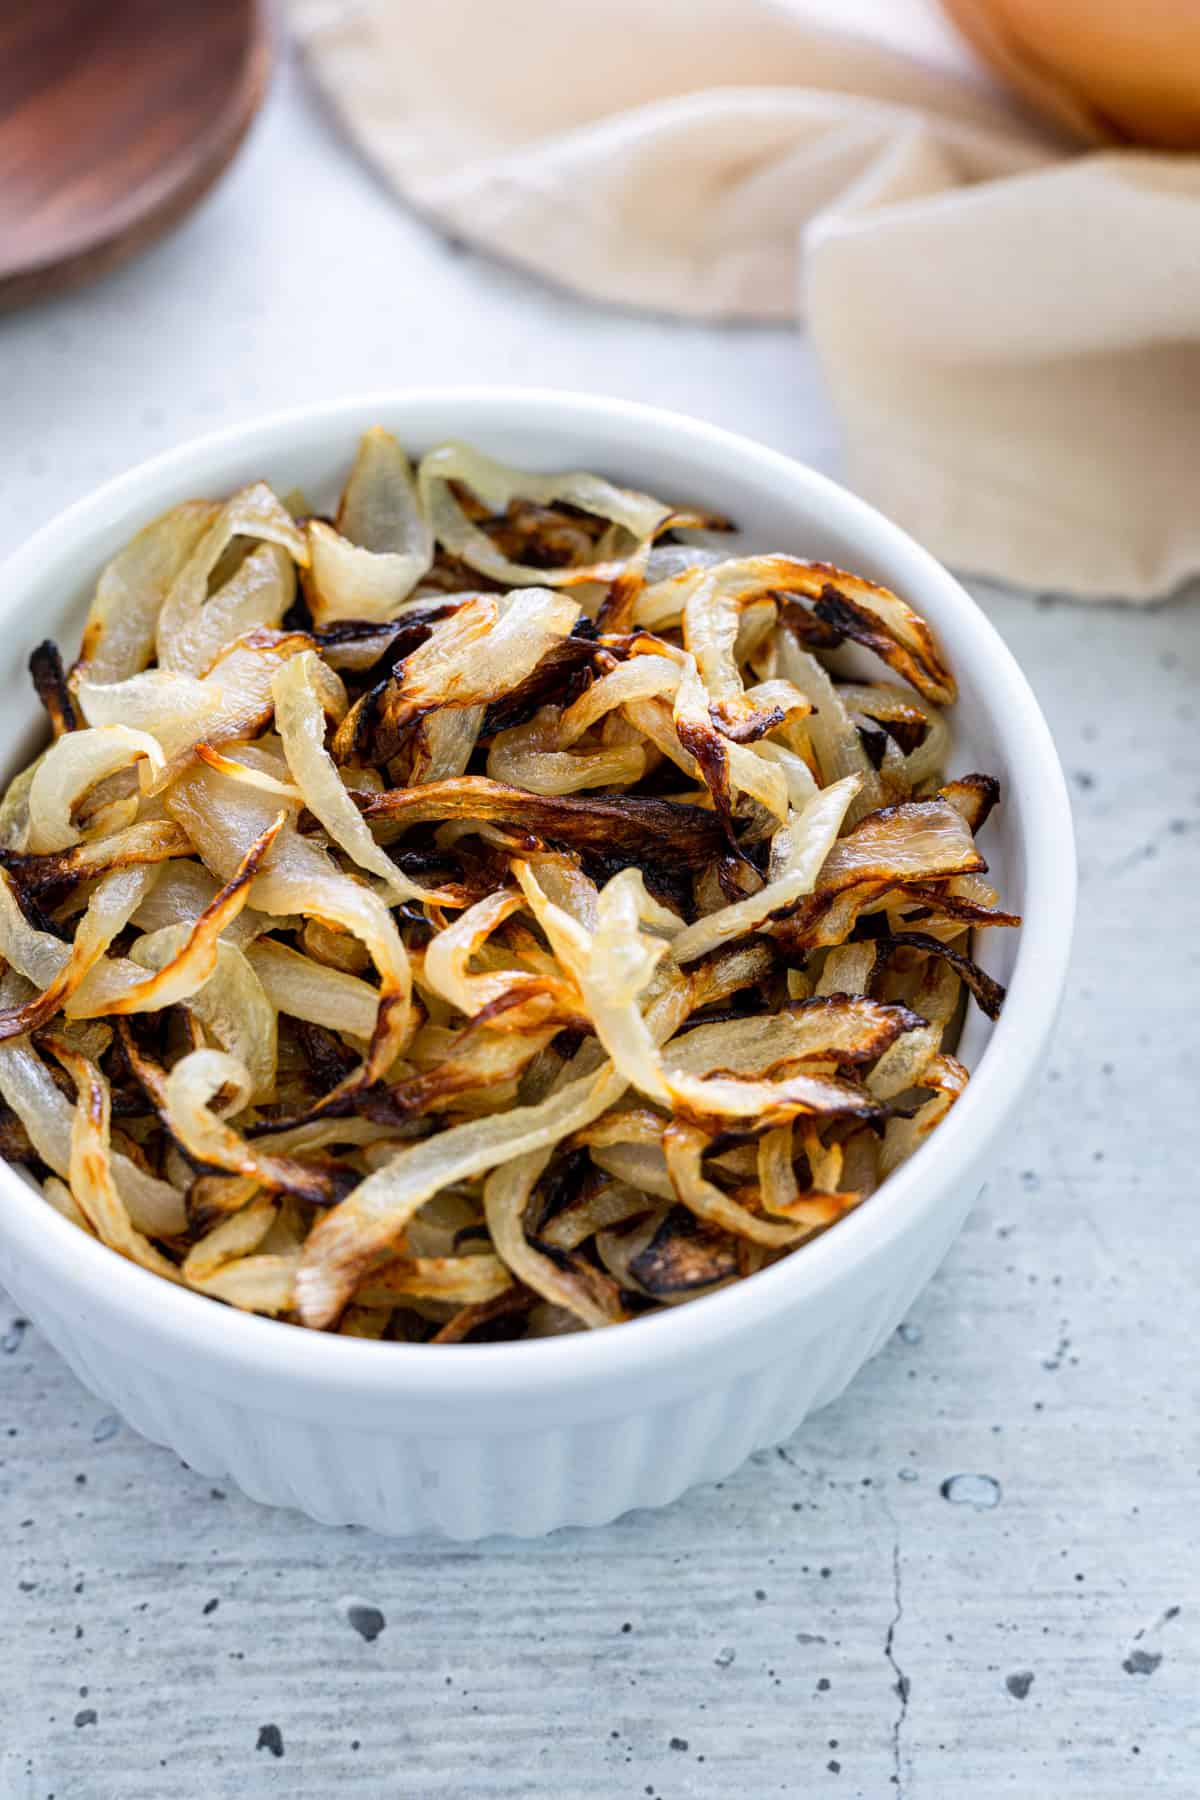 A small bowl of air-fried onions.